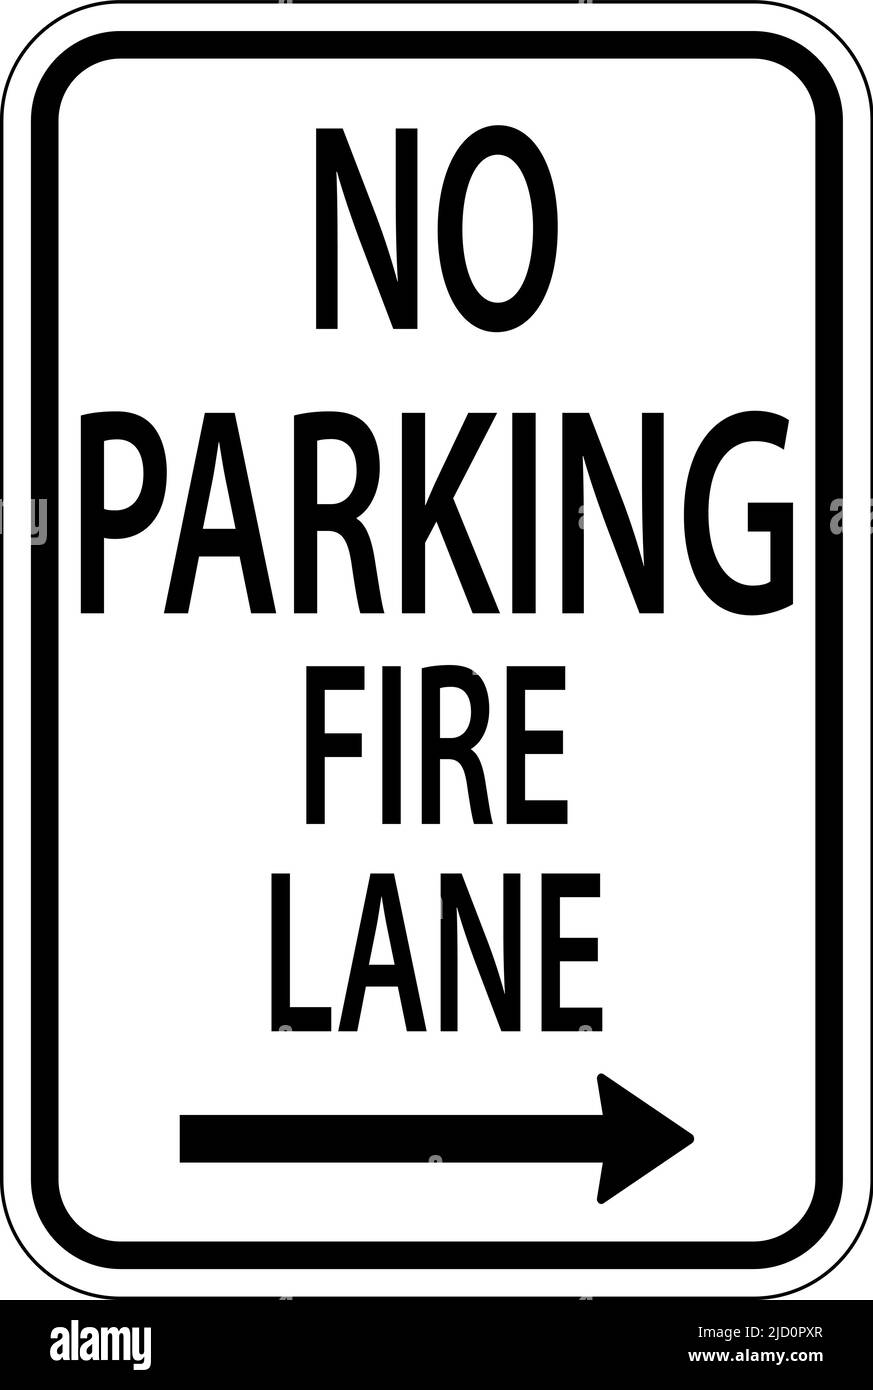 No Parking Fire Lane Right Arrow Sign On White Background Stock Vector